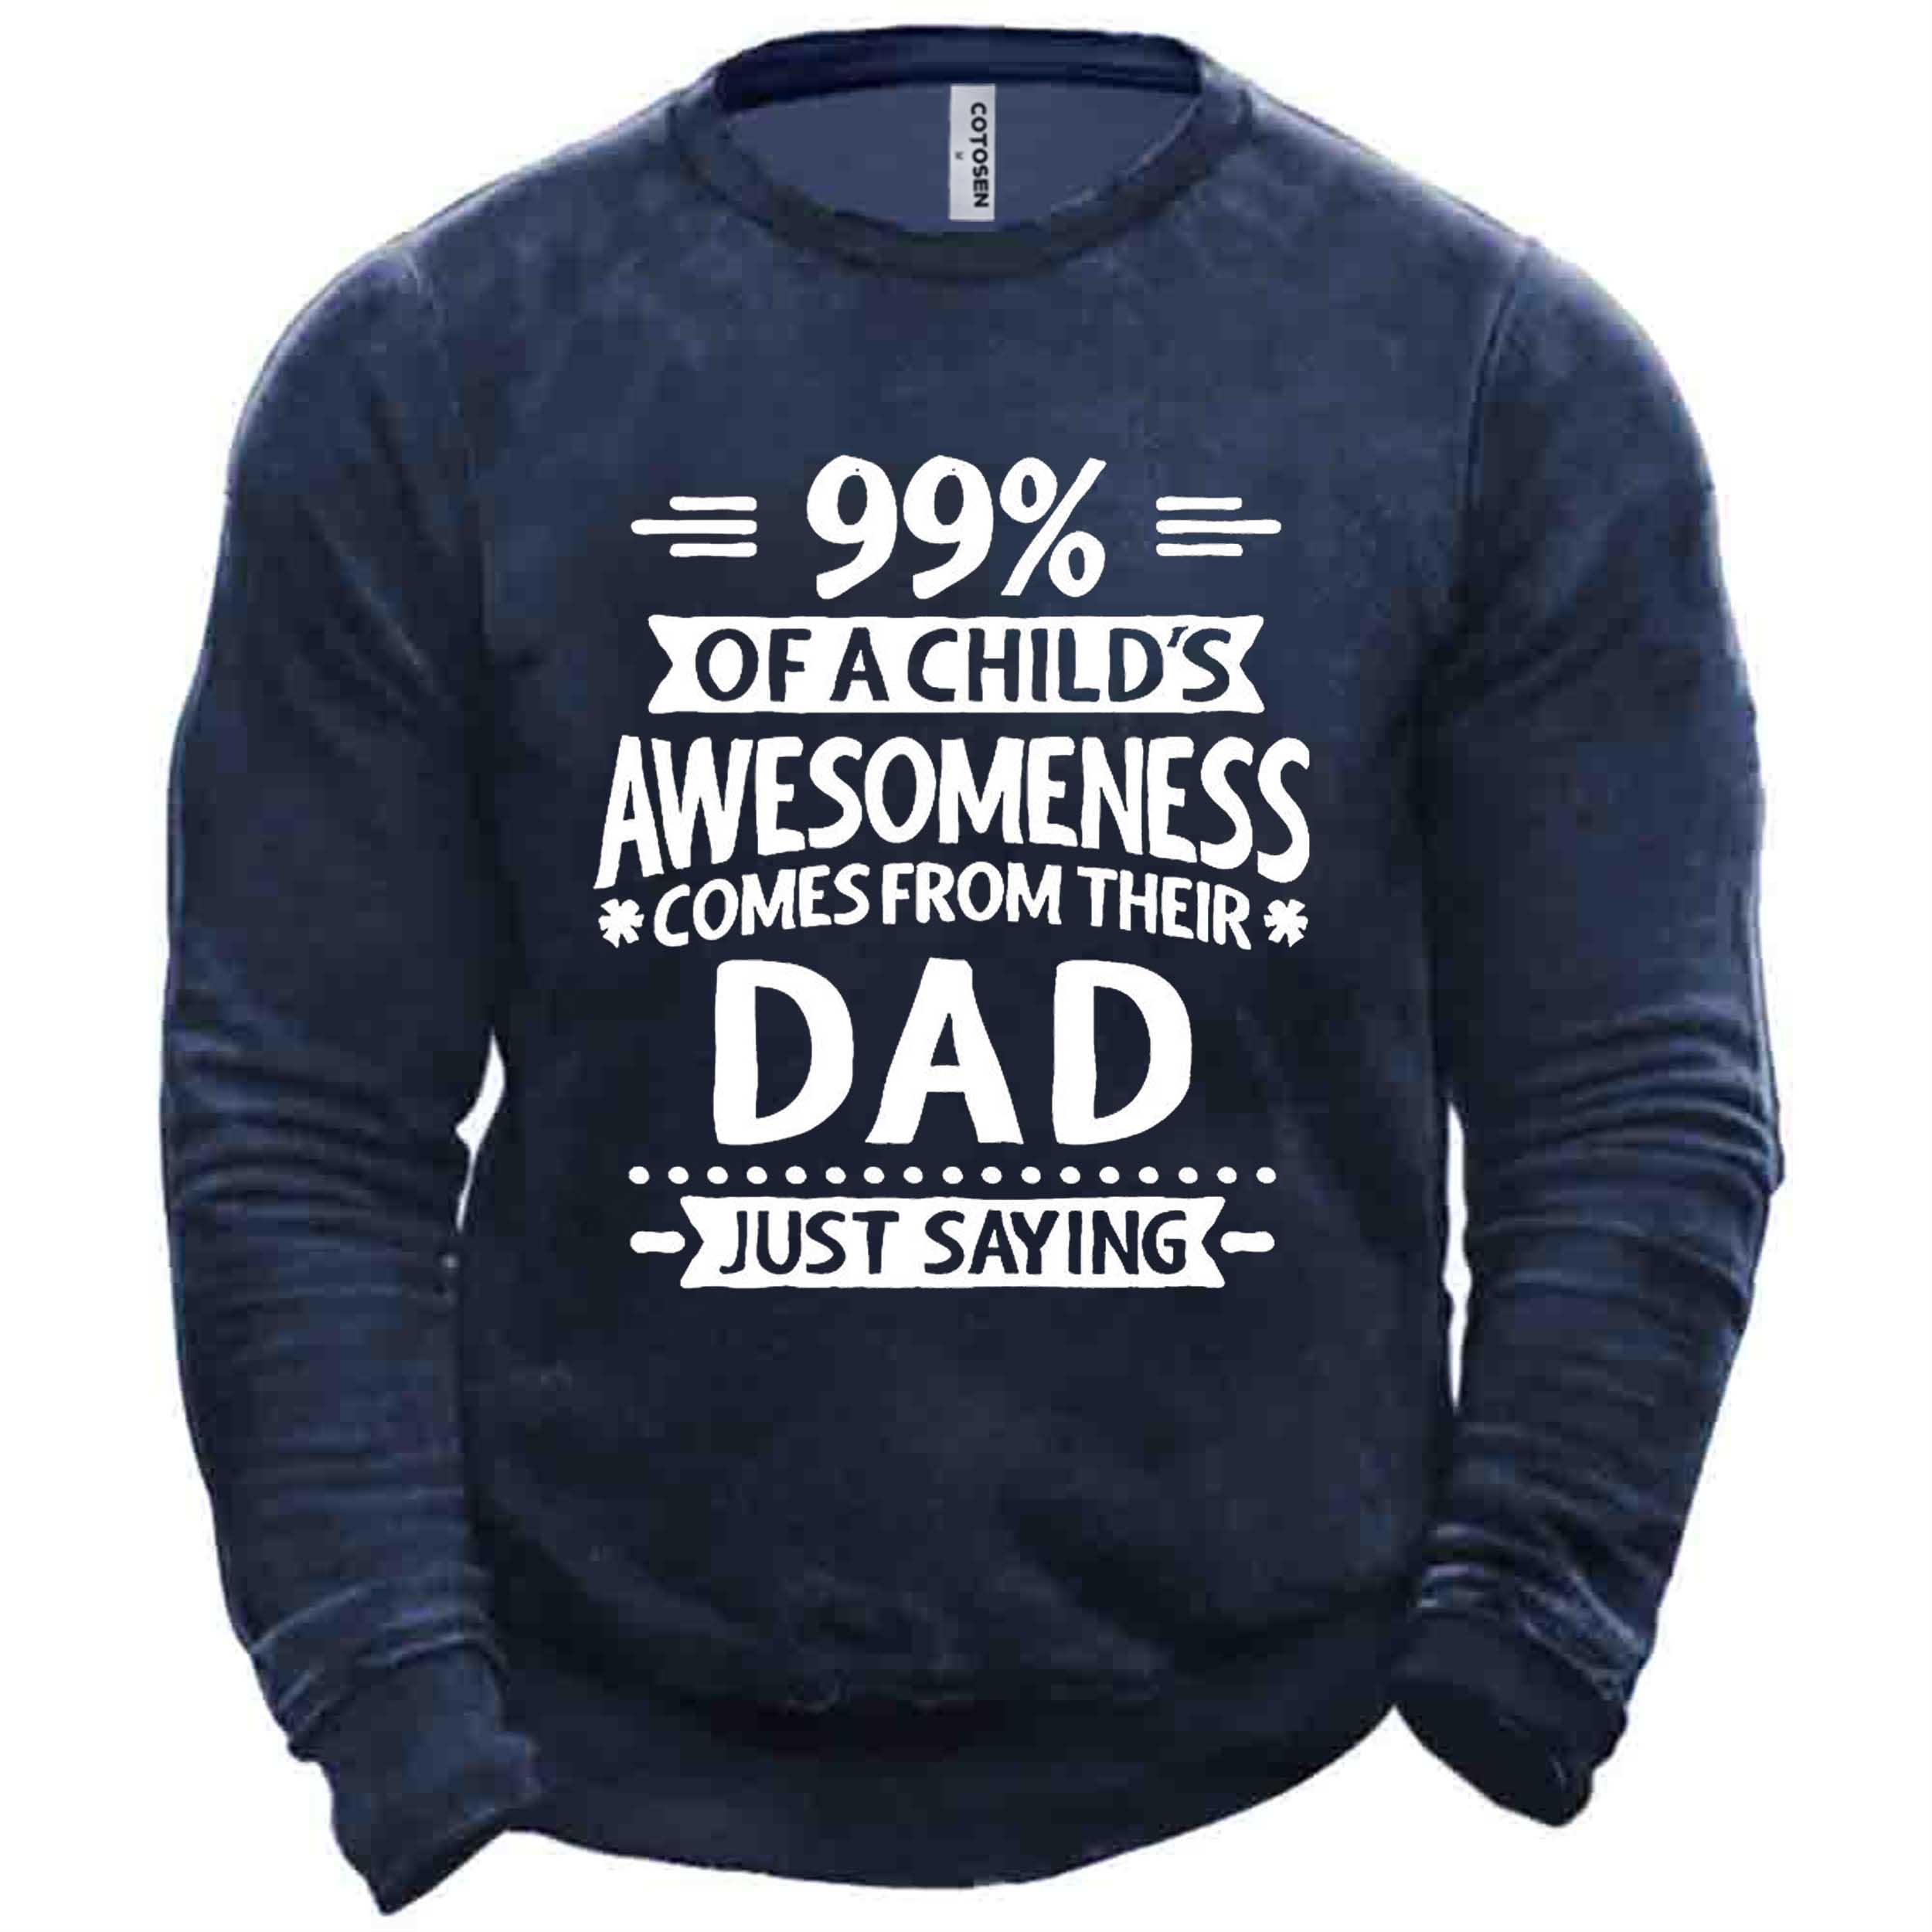 Men's 99% Of A Chic Child's Awesomeness Comes From Their Dad Sweatshirt